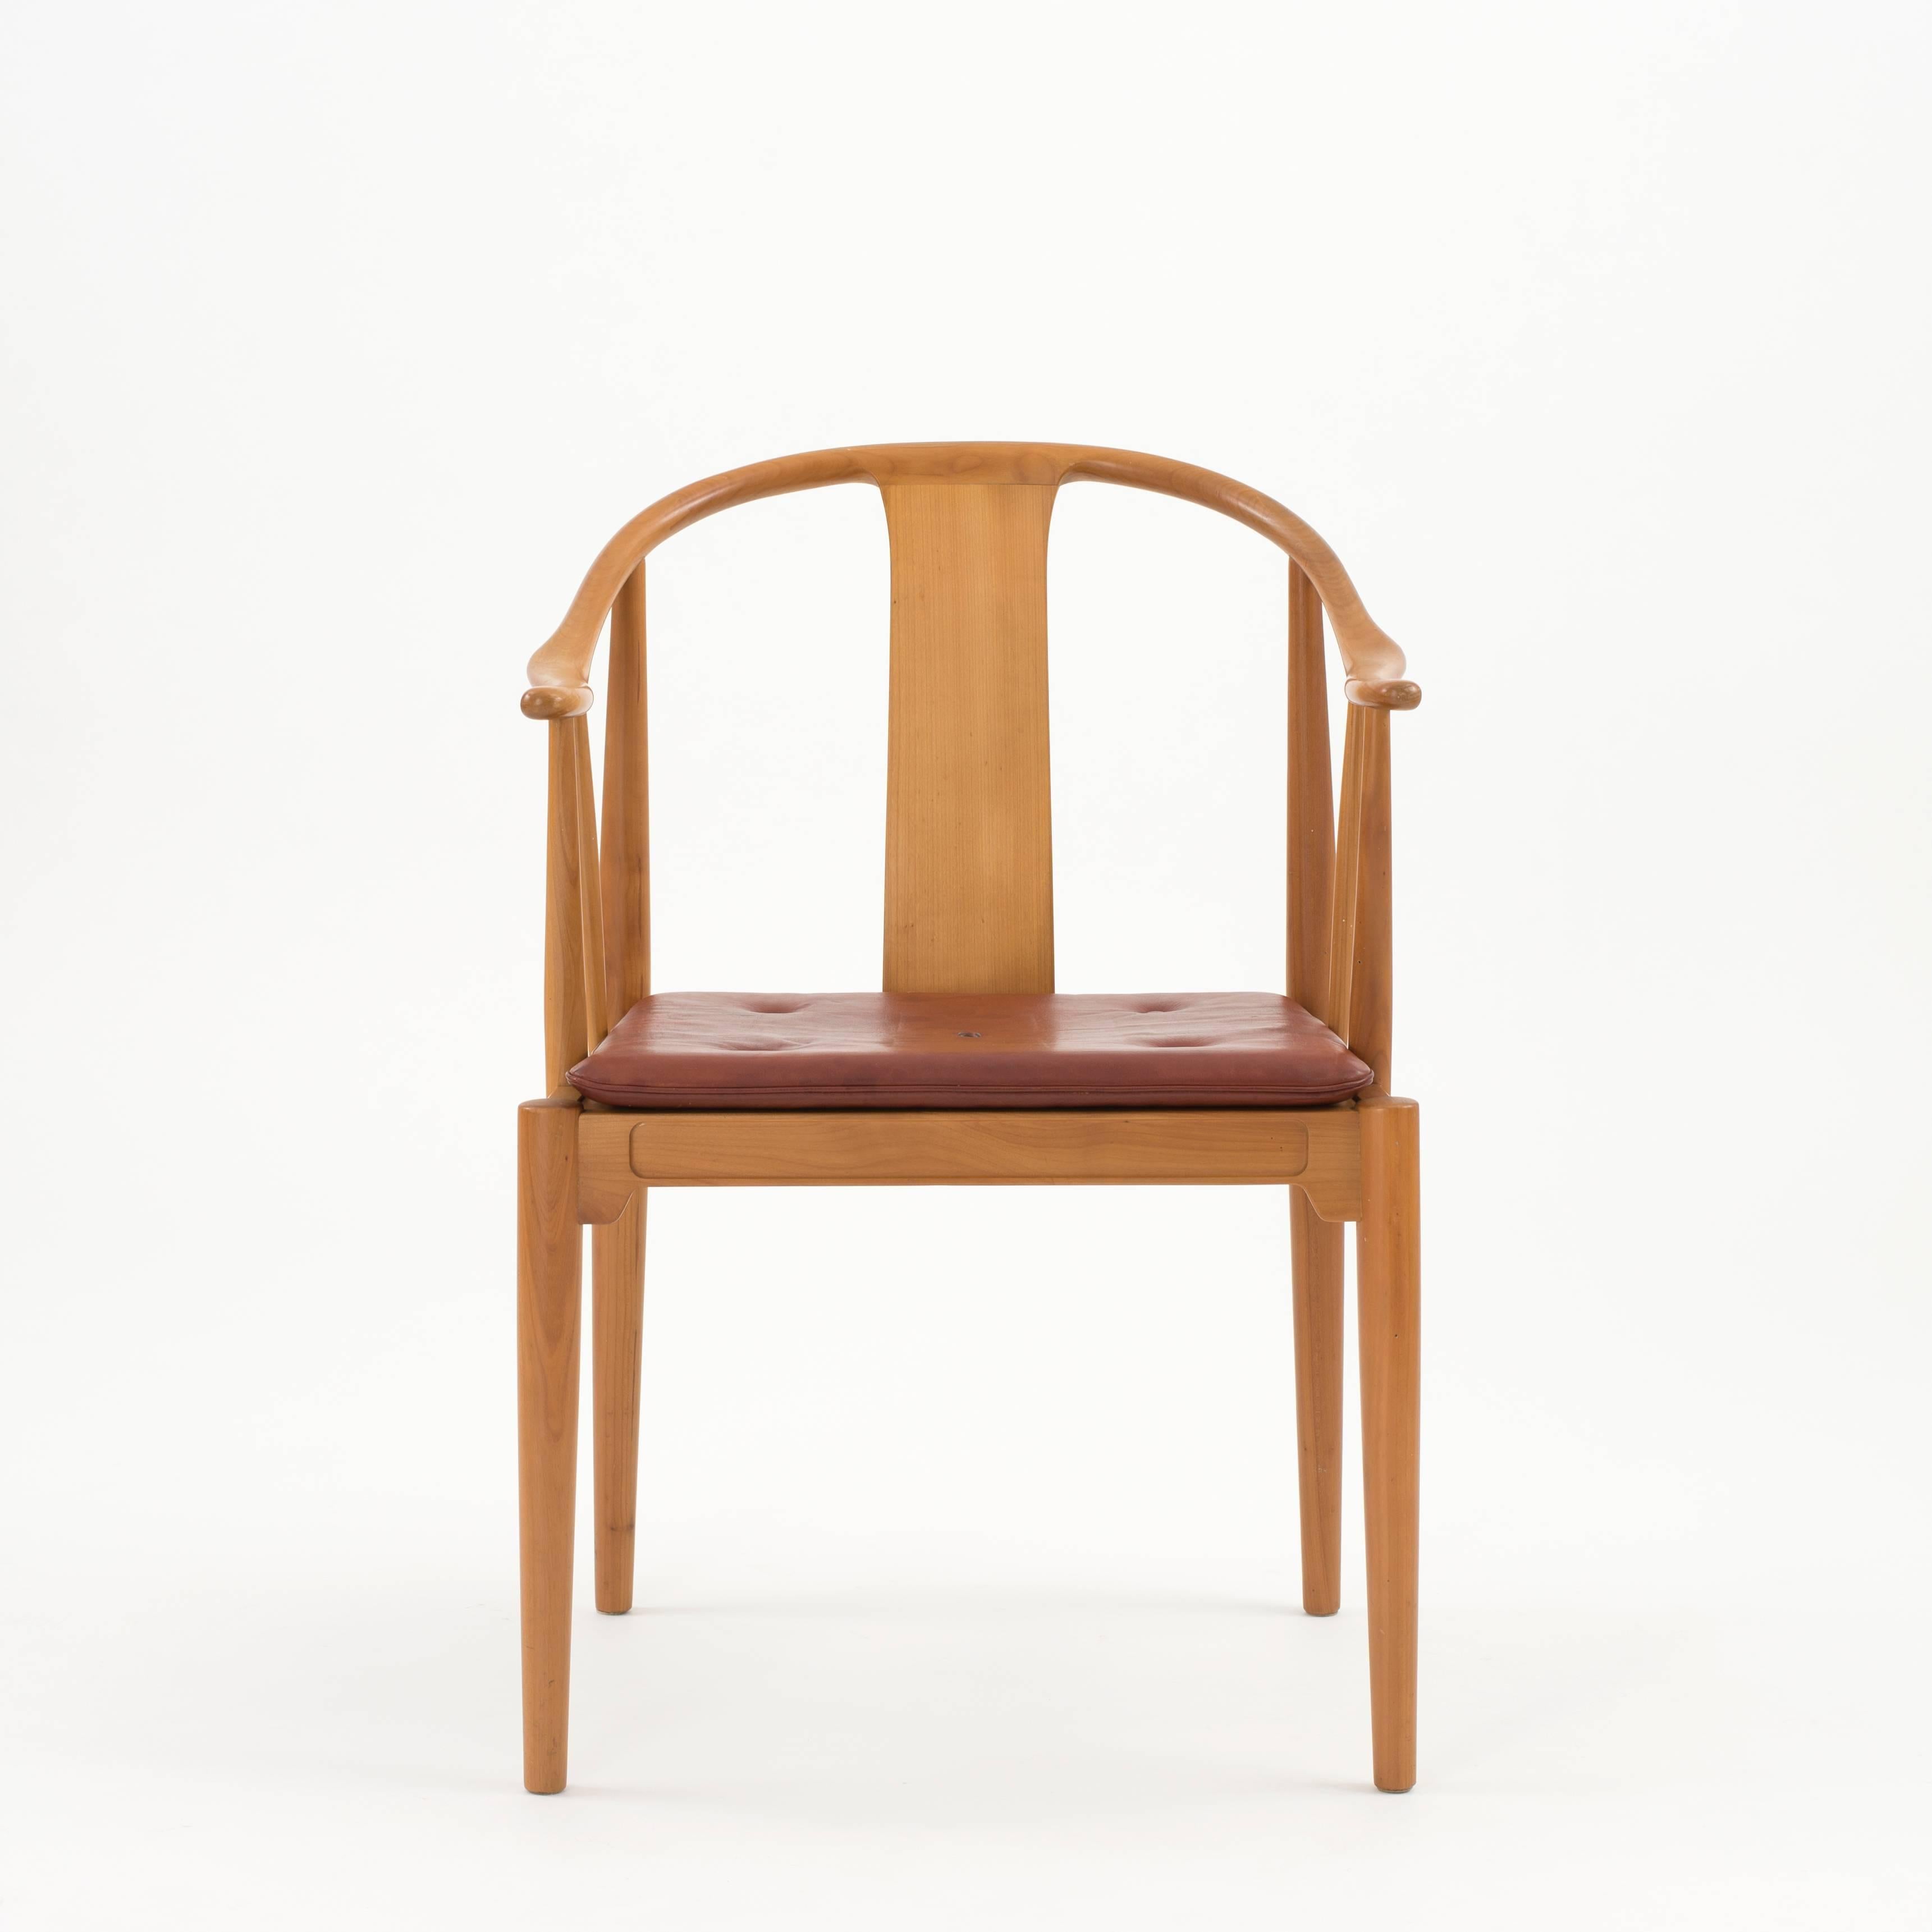 China chair by Hans J. Wegner, 1944. Executed by Fritz Hansen, 1970.

Cherry wood and natural tanned leather cushion.